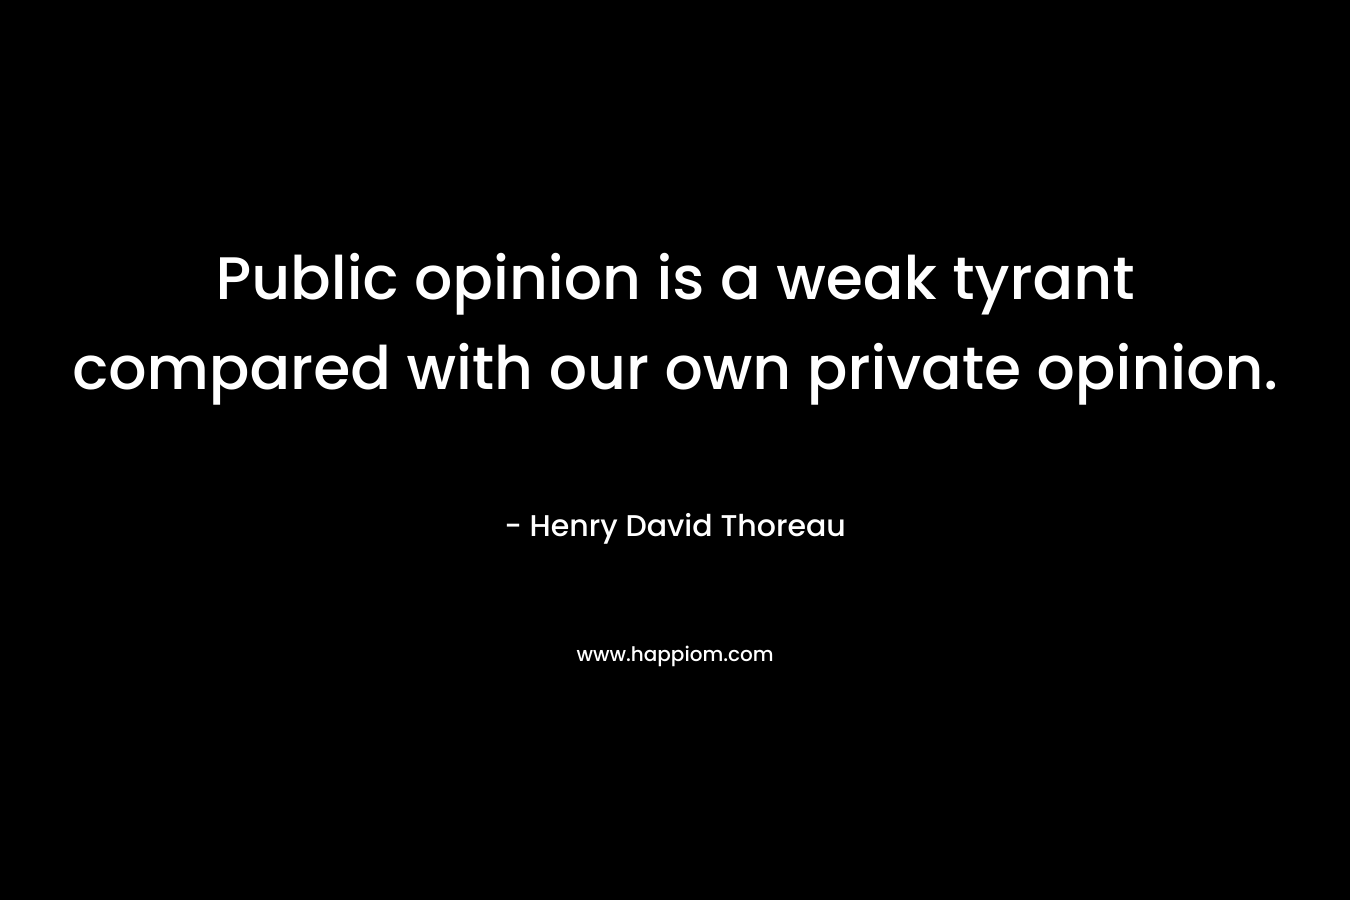 Public opinion is a weak tyrant compared with our own private opinion.